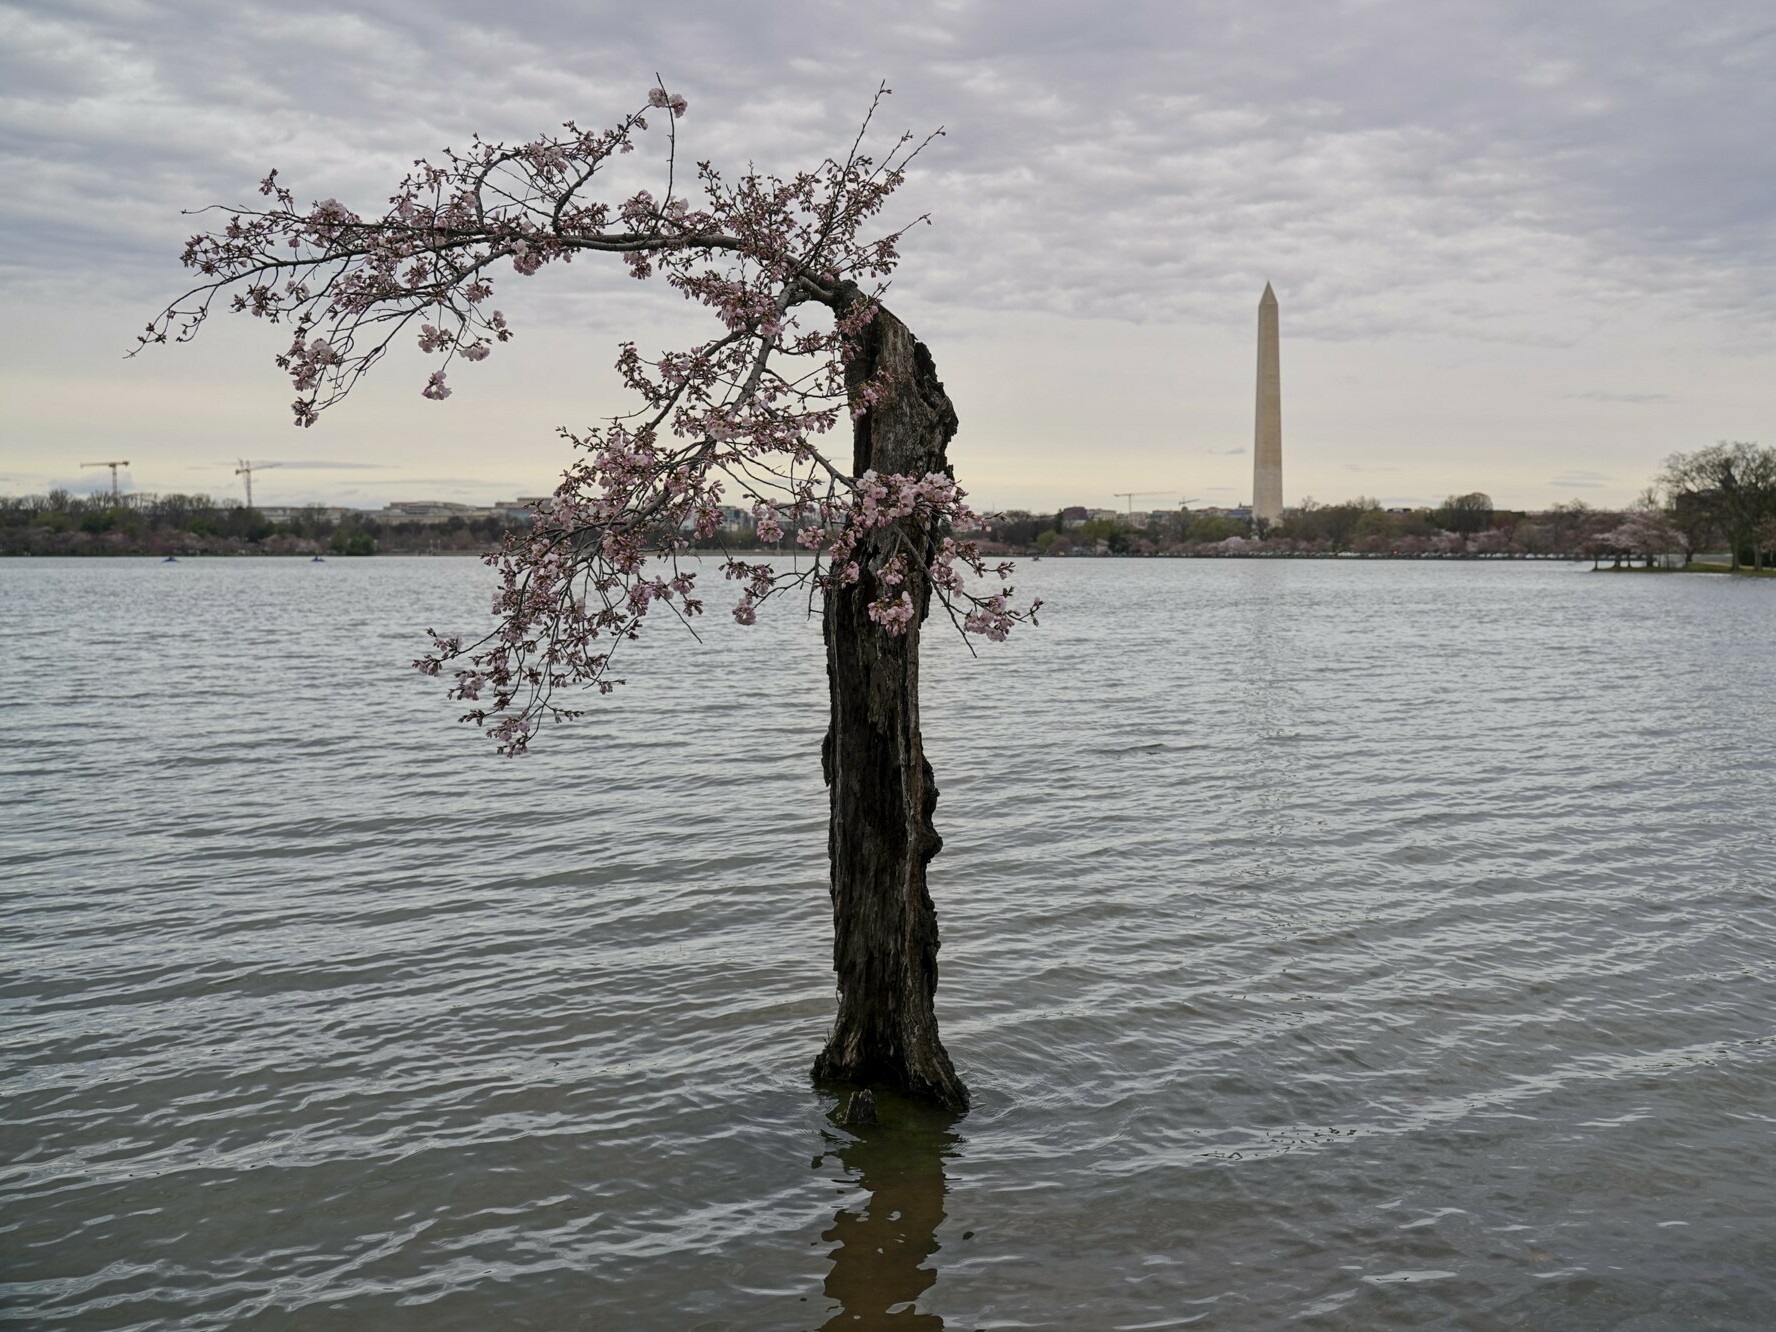 So long, Stumpy. More than 150 of D.C.’s cherry trees have to go as water rises